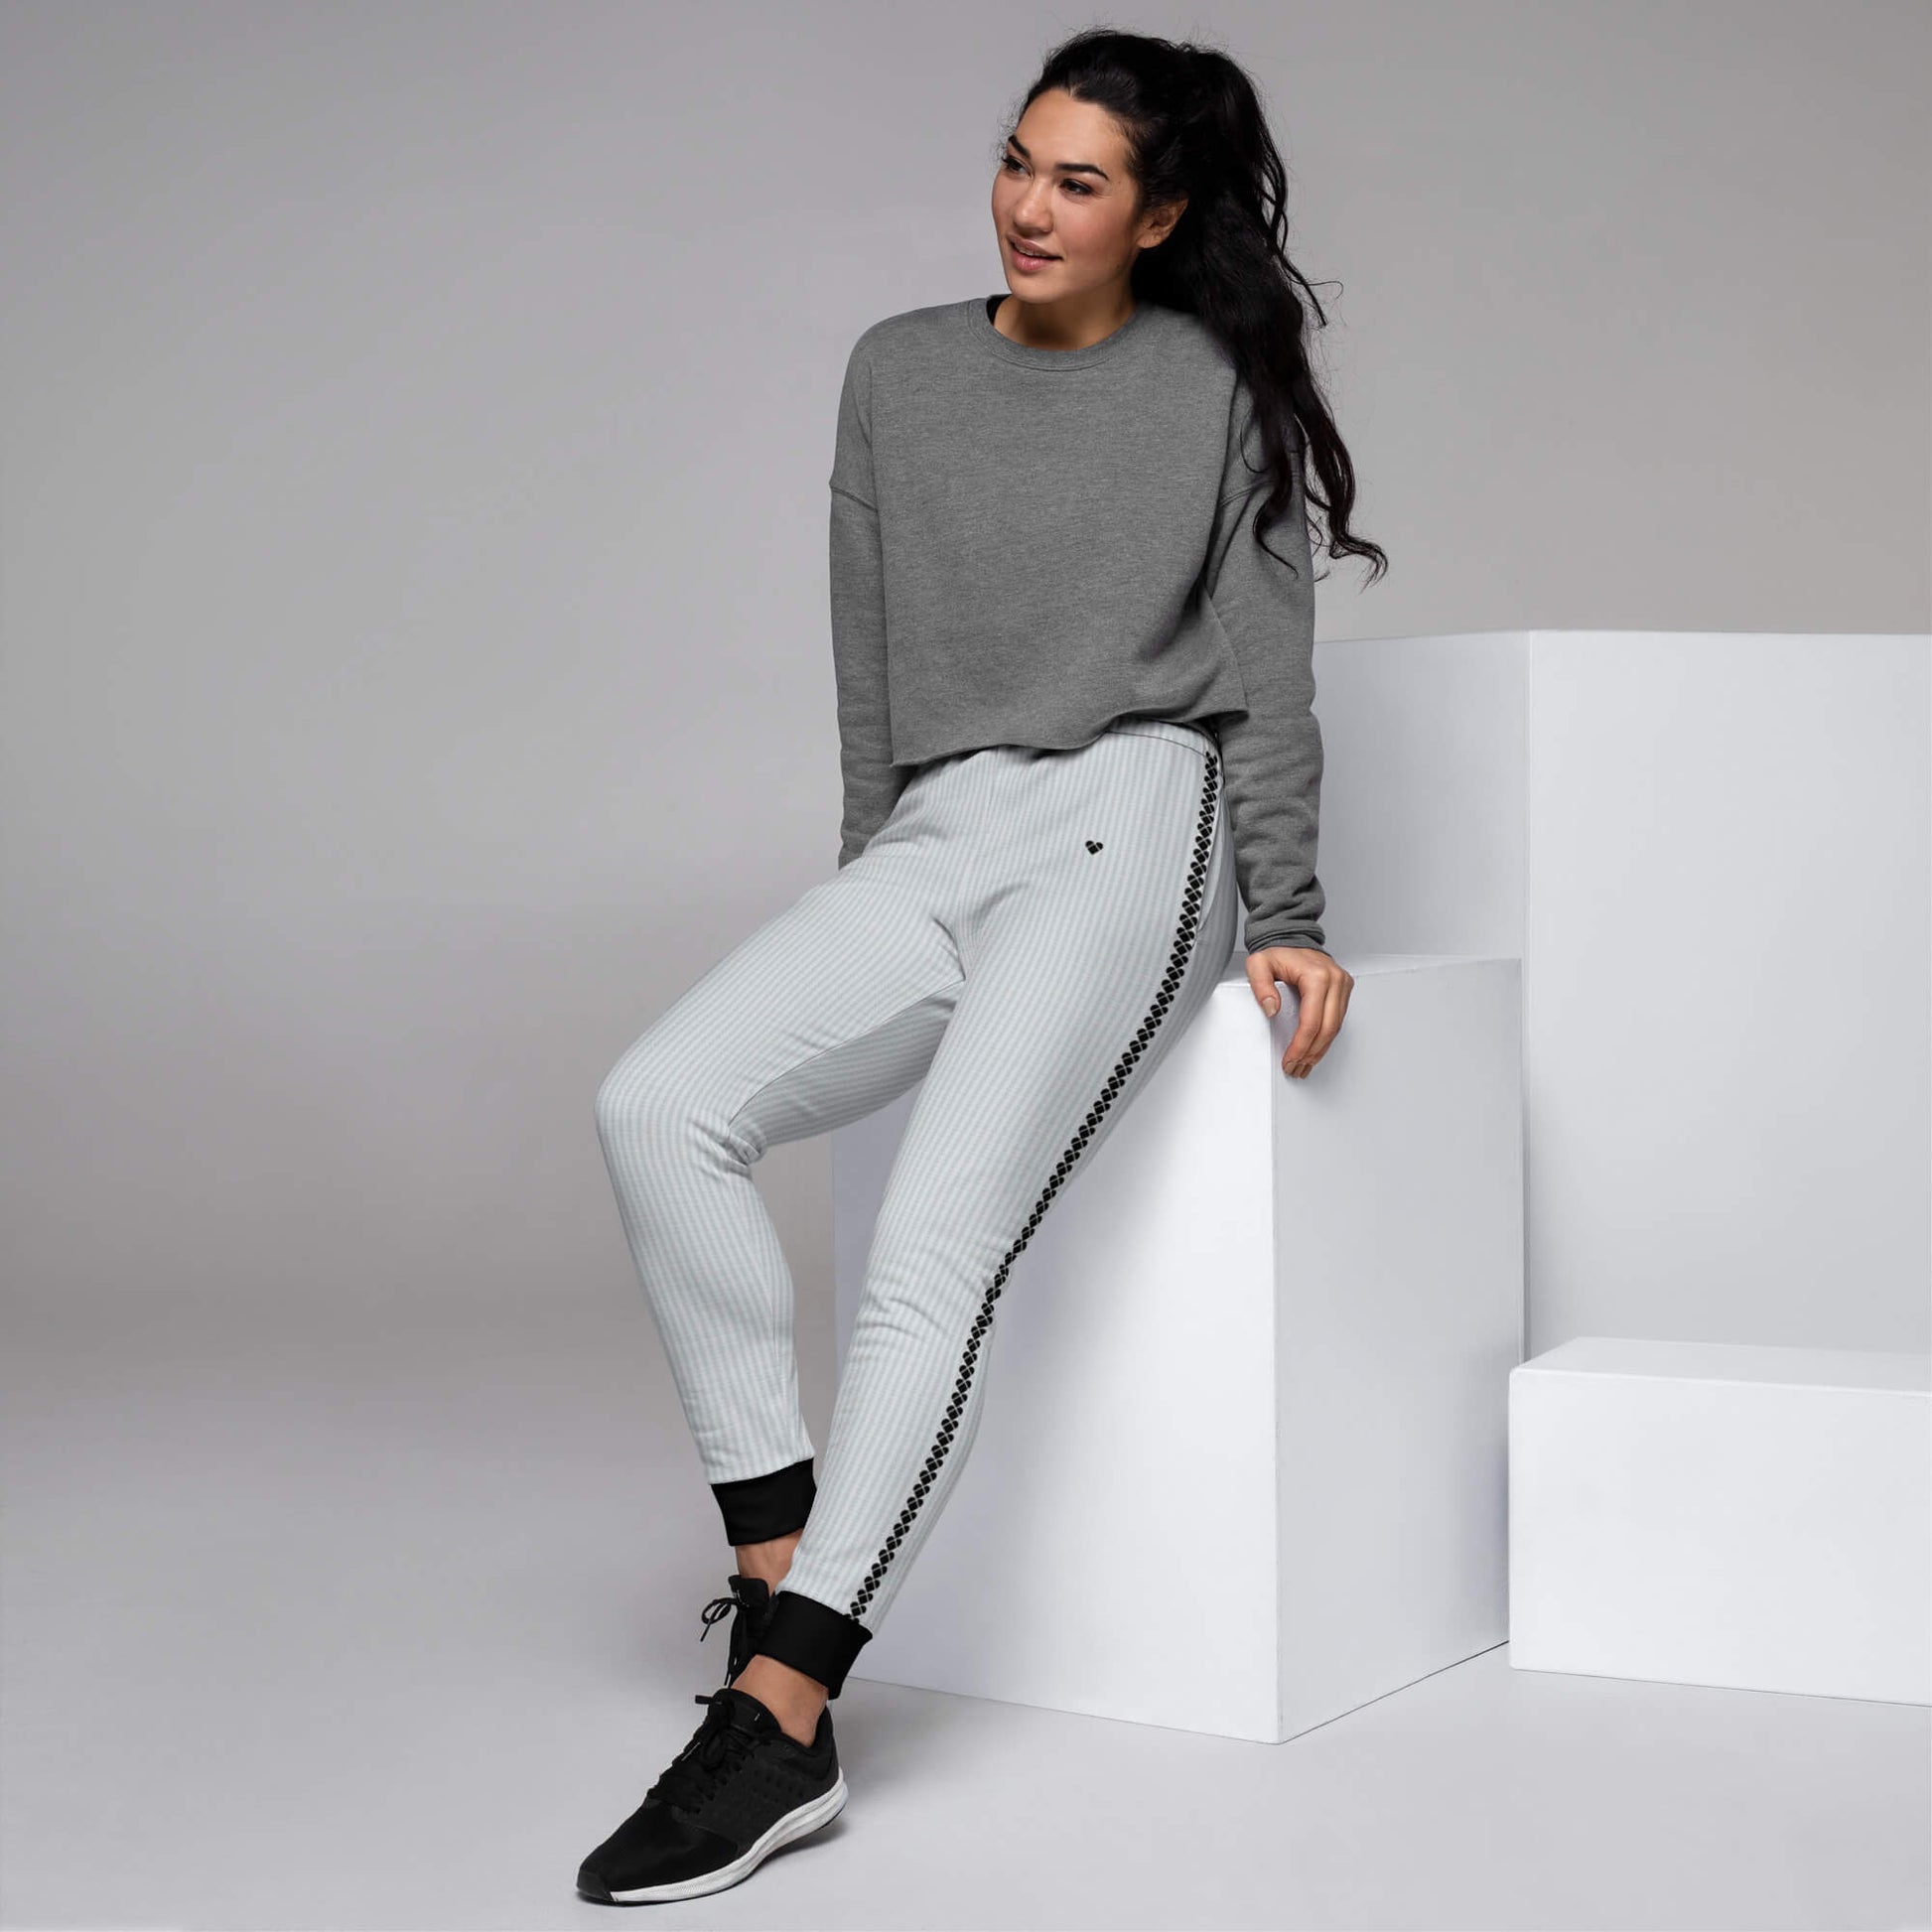 model wearing Fashion-forward light gray joggers for women with Hearts Stripe design by Amor Primero